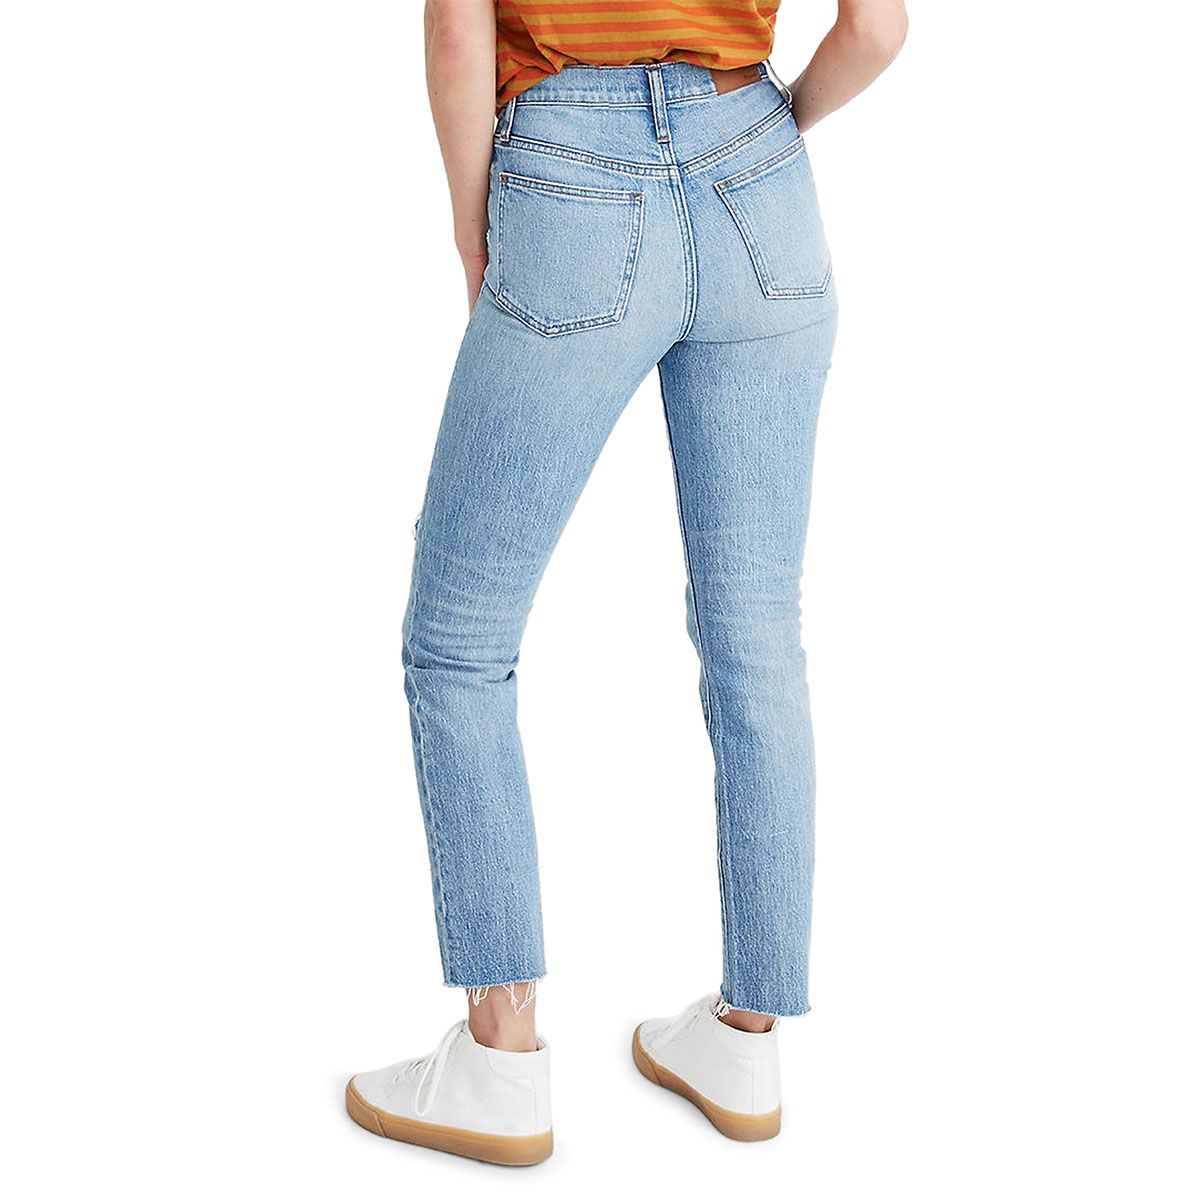 11 Best Jeans for Flat Butts: Levi's, Madewell, Frame, and More | InStyle